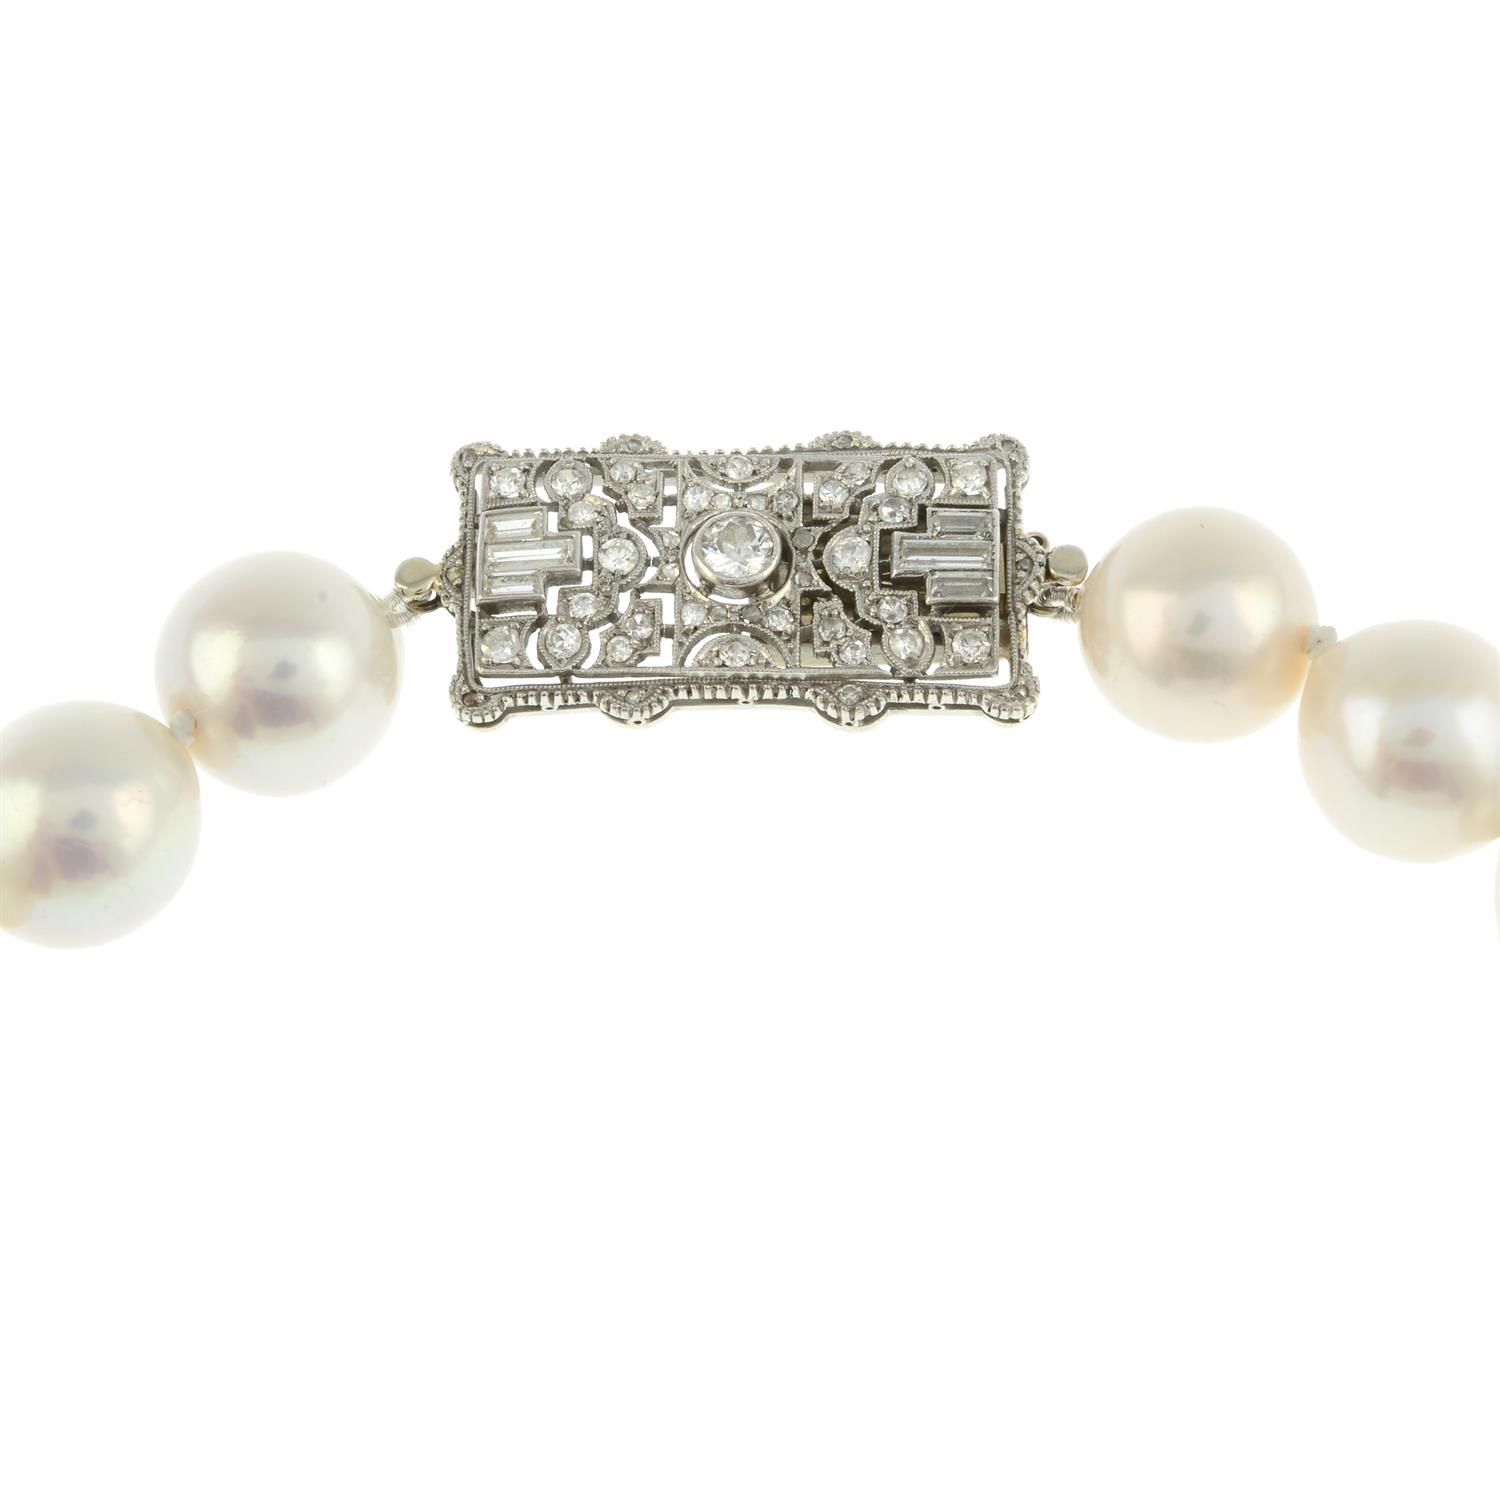 Cultured pearl and diamond necklace - Image 6 of 7